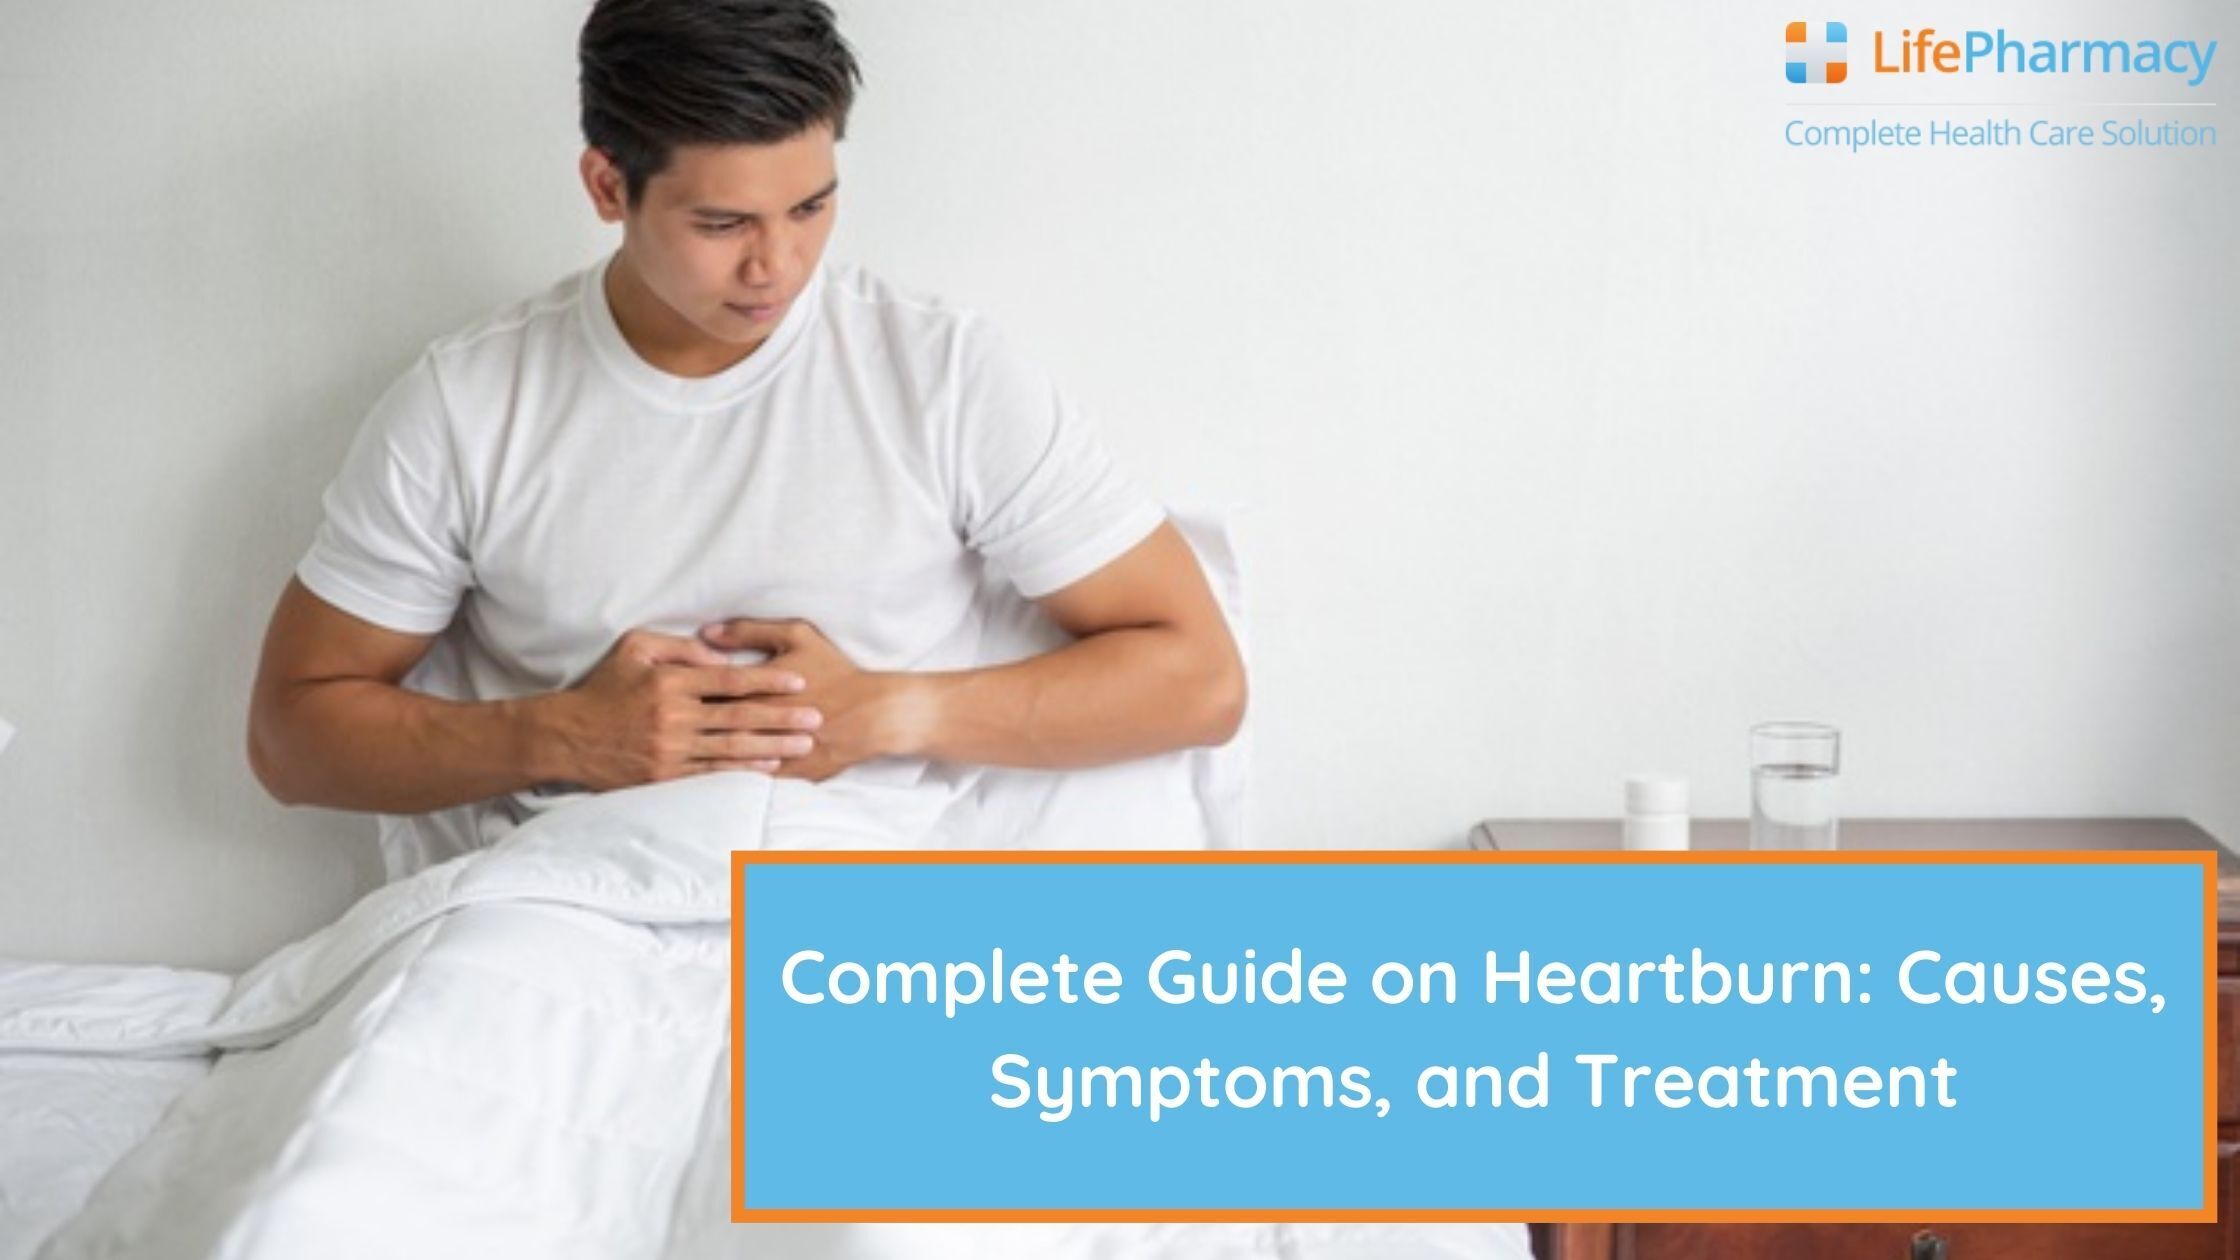 Complete Guide on Heartburn: Causes, Symptoms, and Treatment